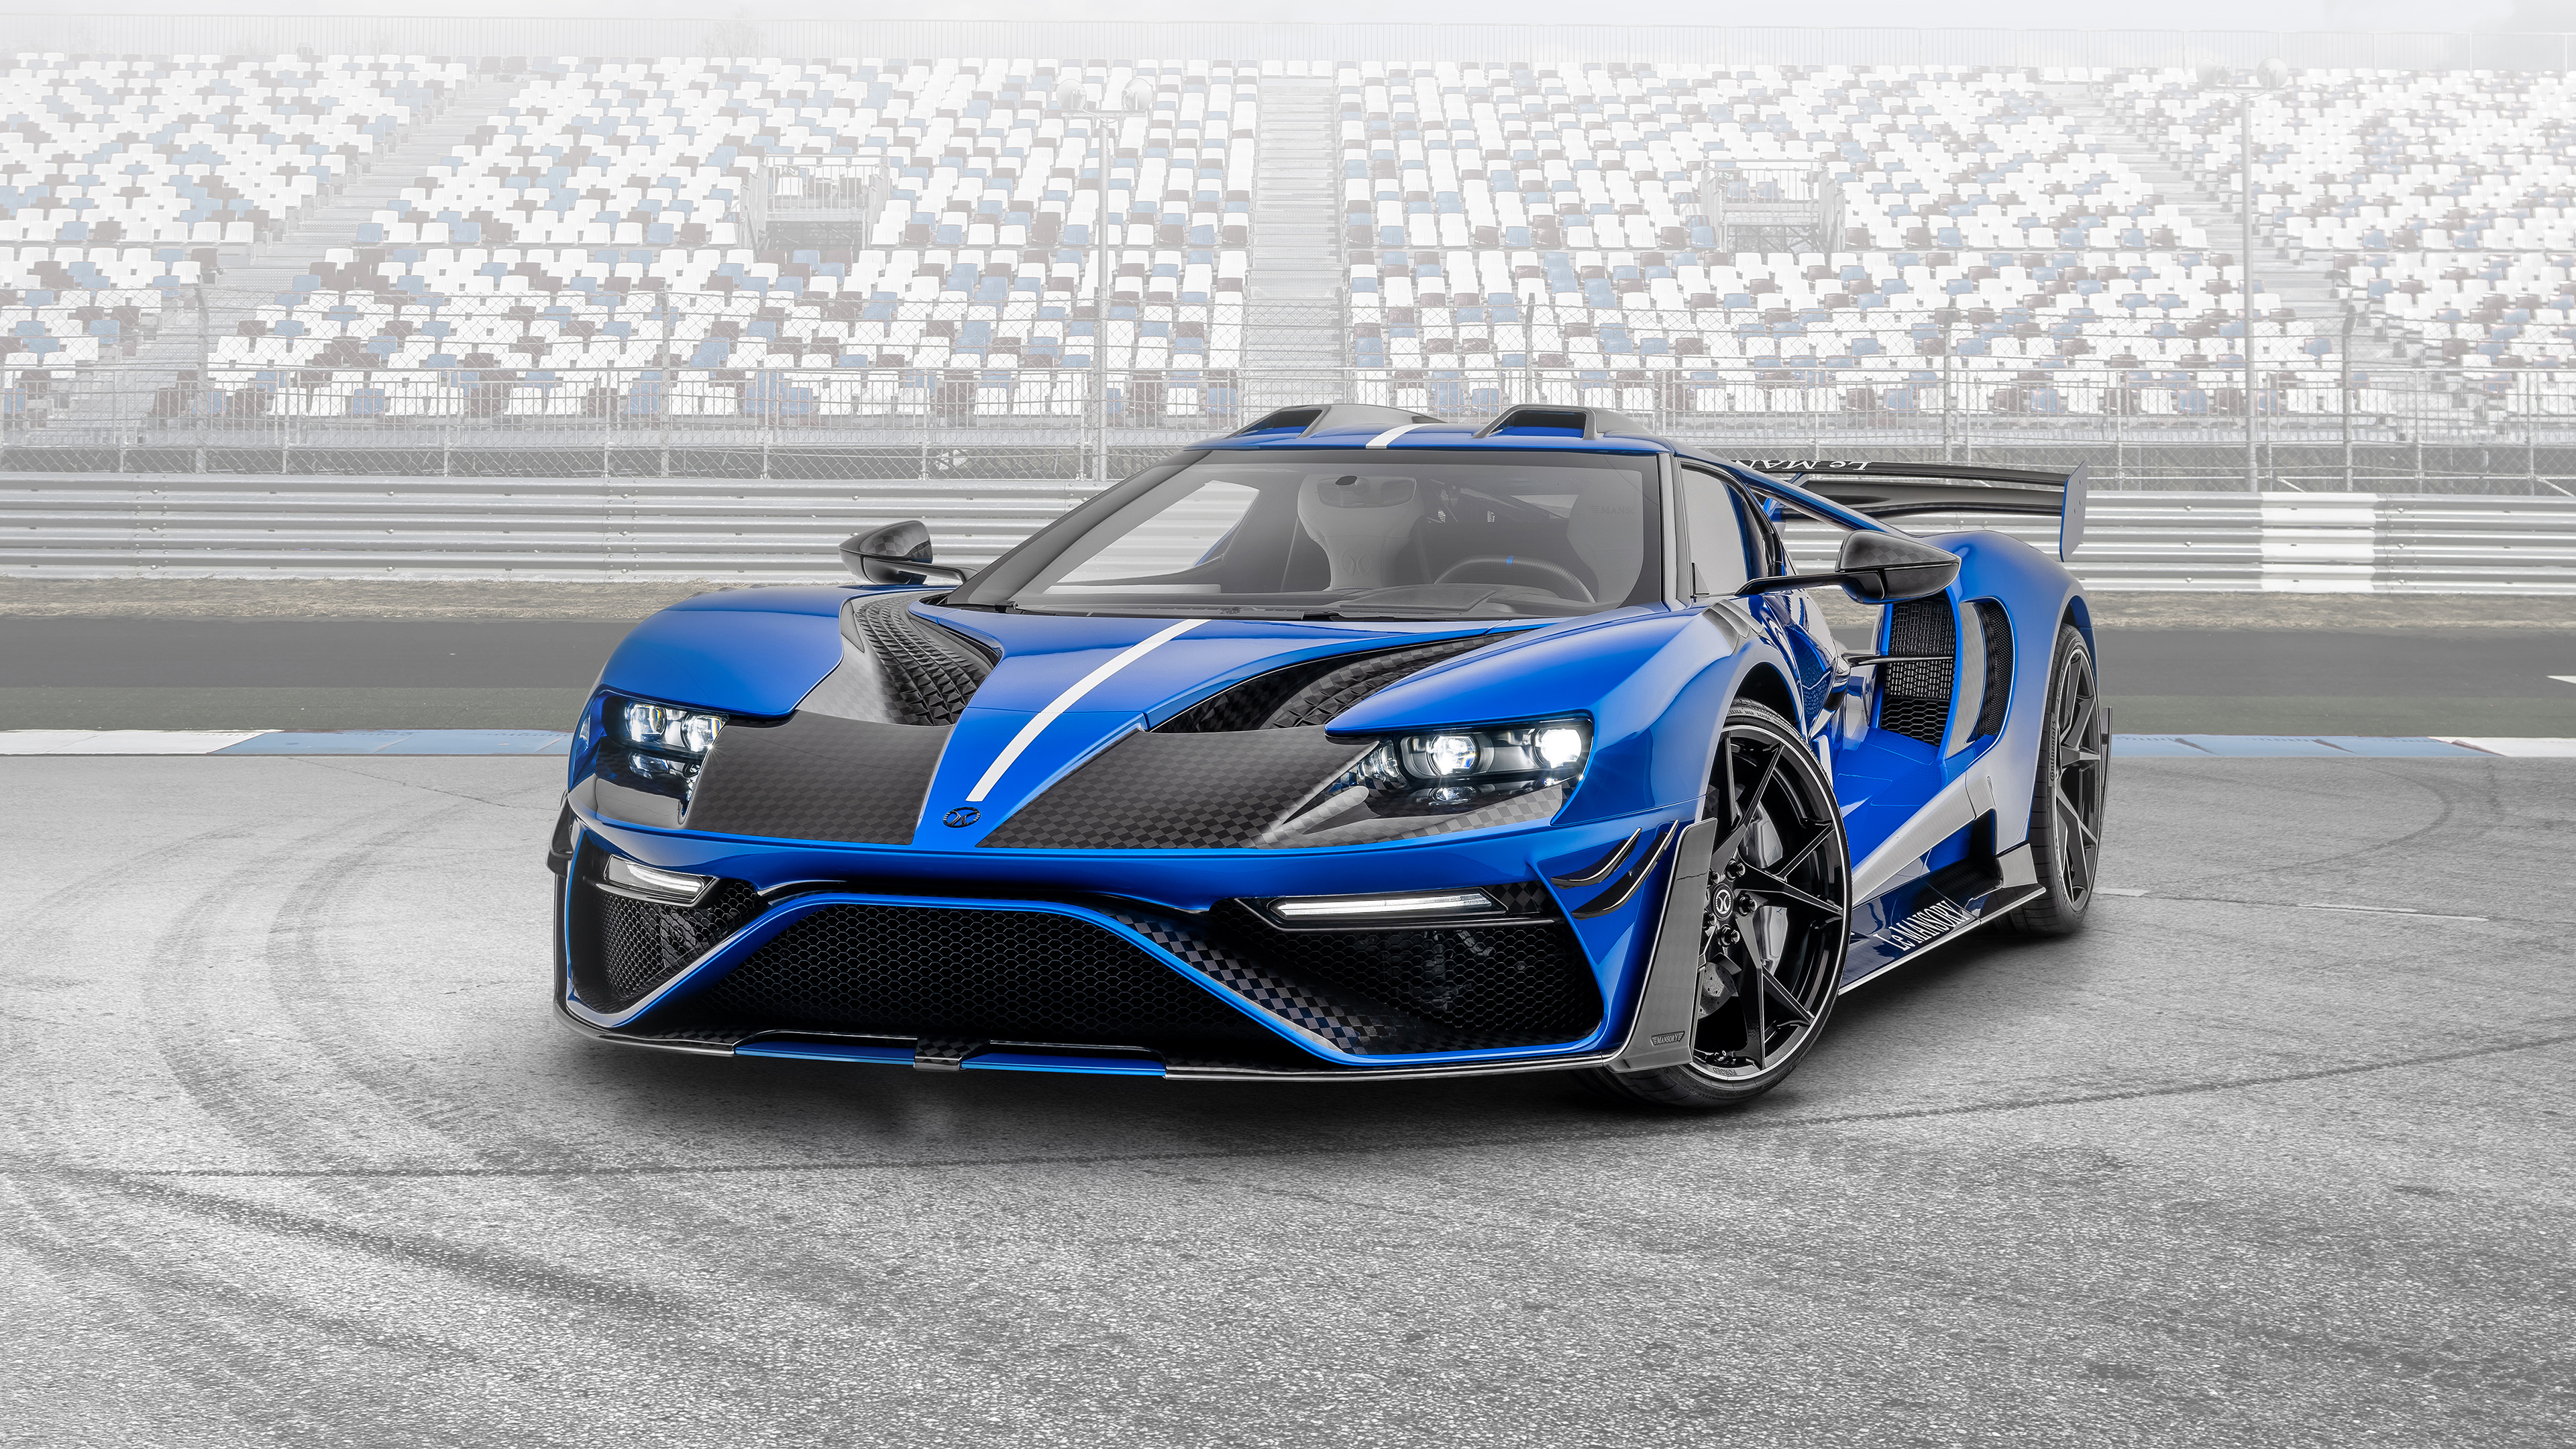 Ford GT Ford Mansory Vehicle Car Supercars Carbon Fiber Blue Cars Race Tracks 3840x2160